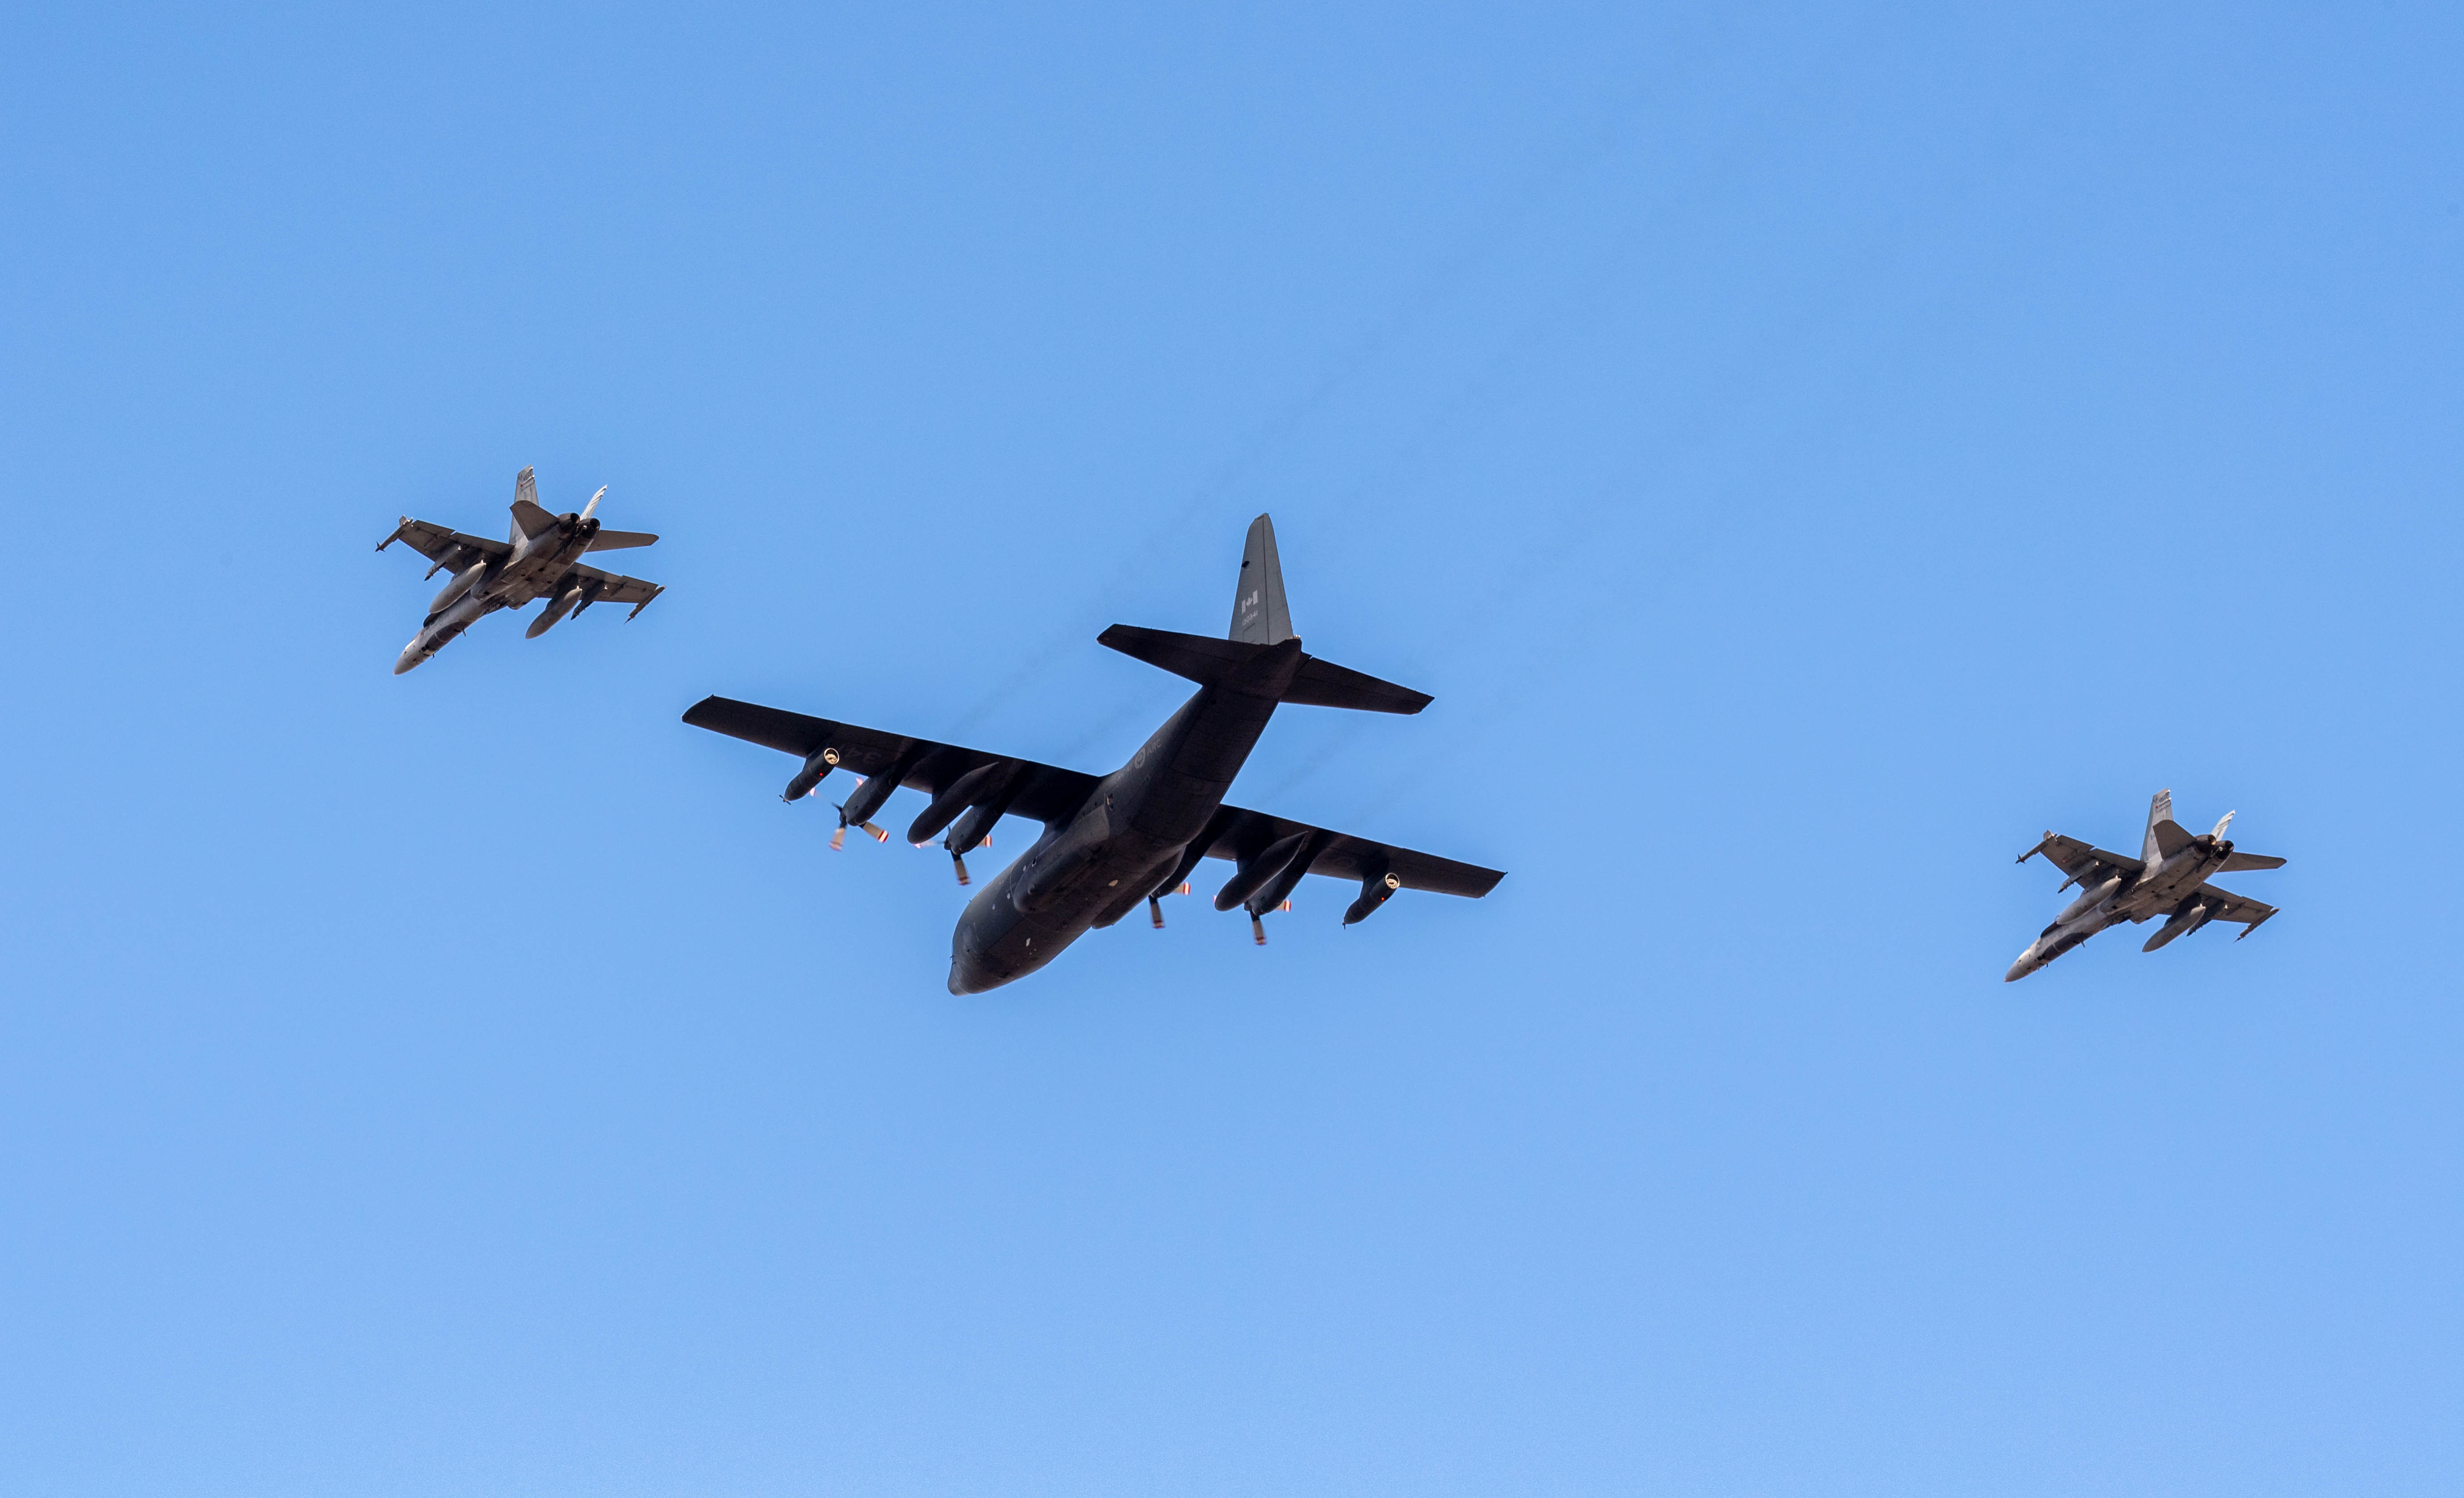 Three aircraft flying in formation in a blue sky. The middle aircraft has propellers and is much bigger that the other two on its sides, which are jet fighters.